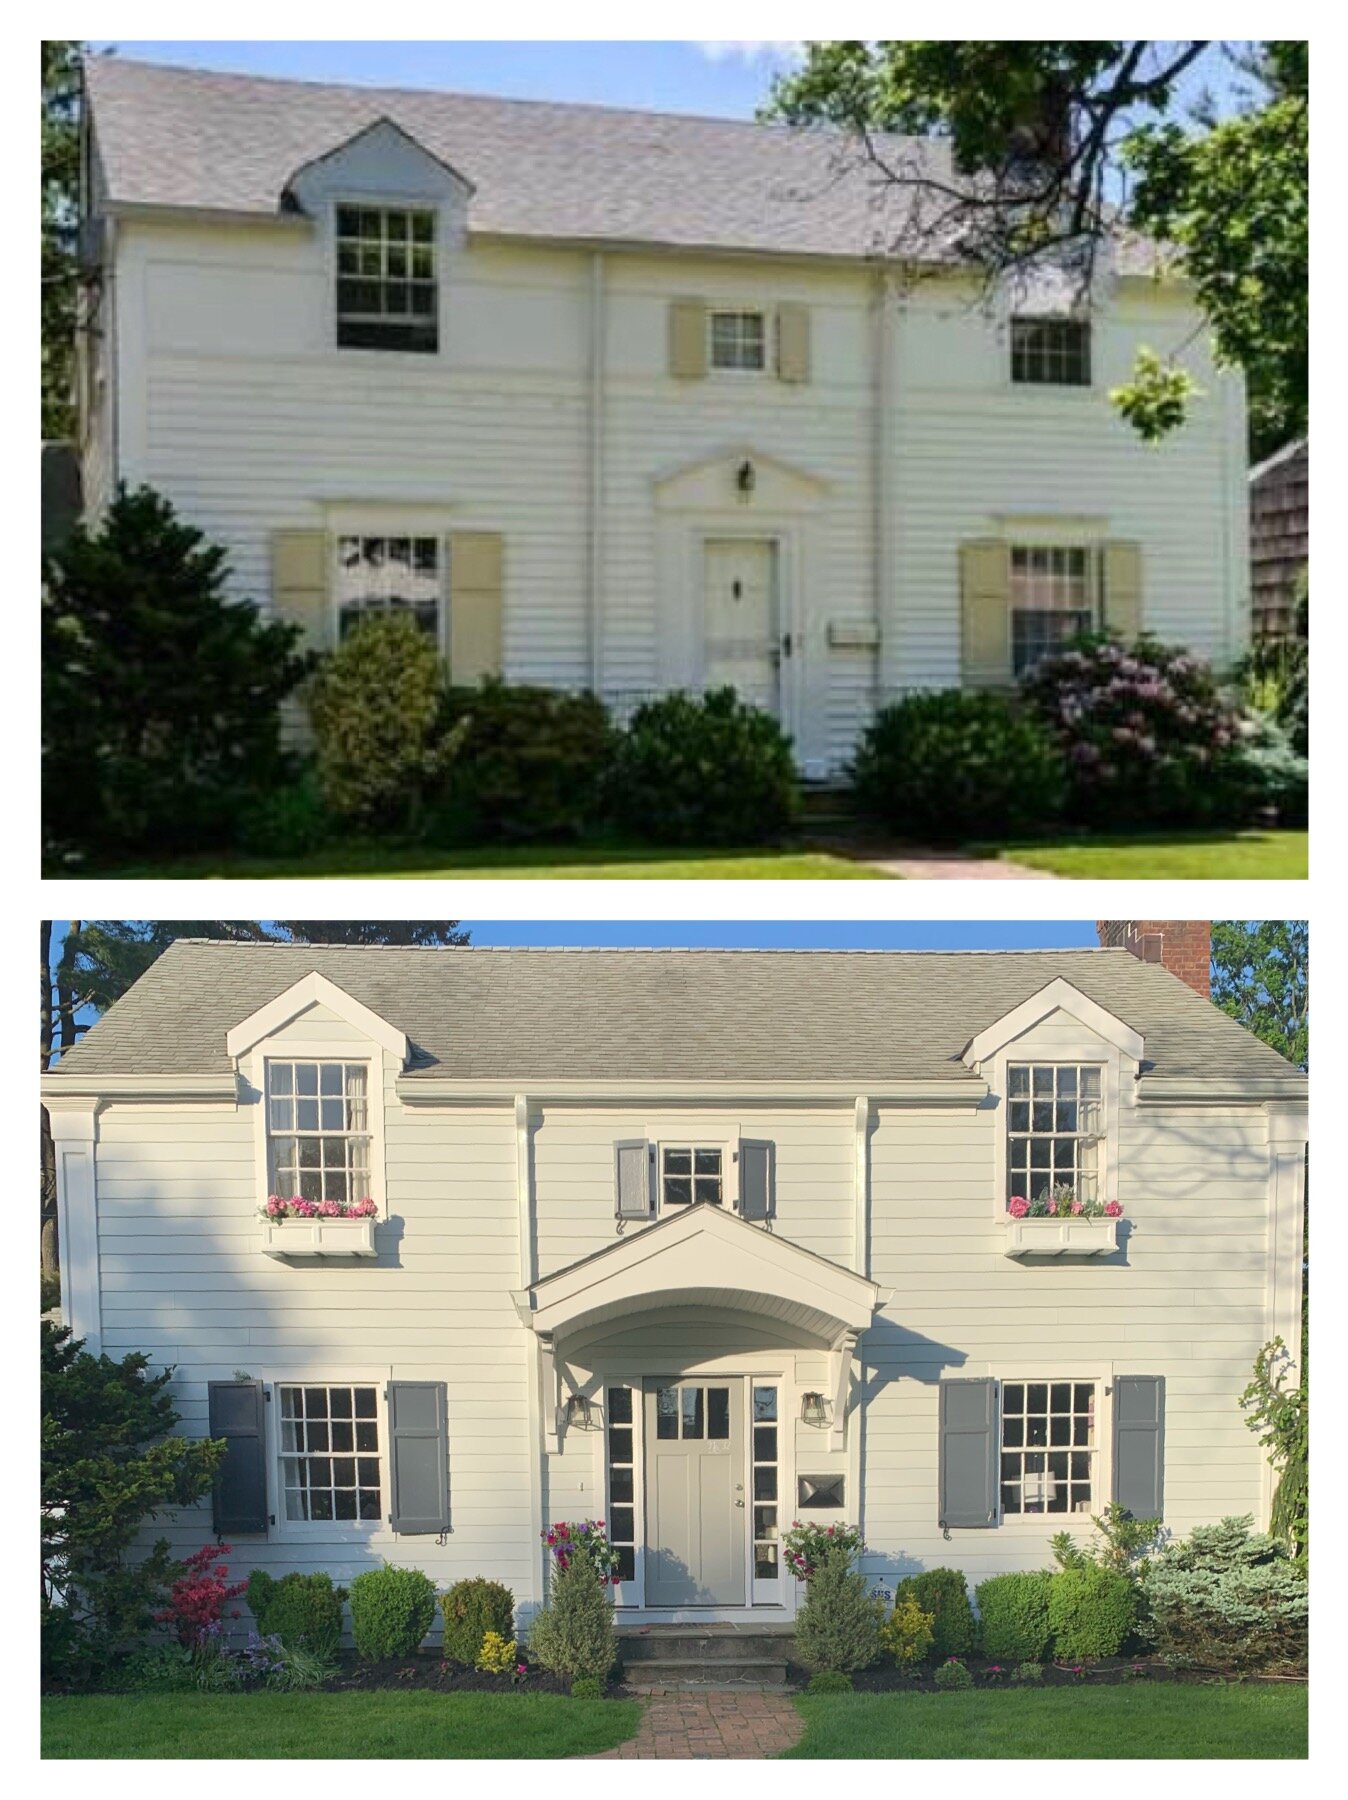 The evolution of our home - before and after the renovations!